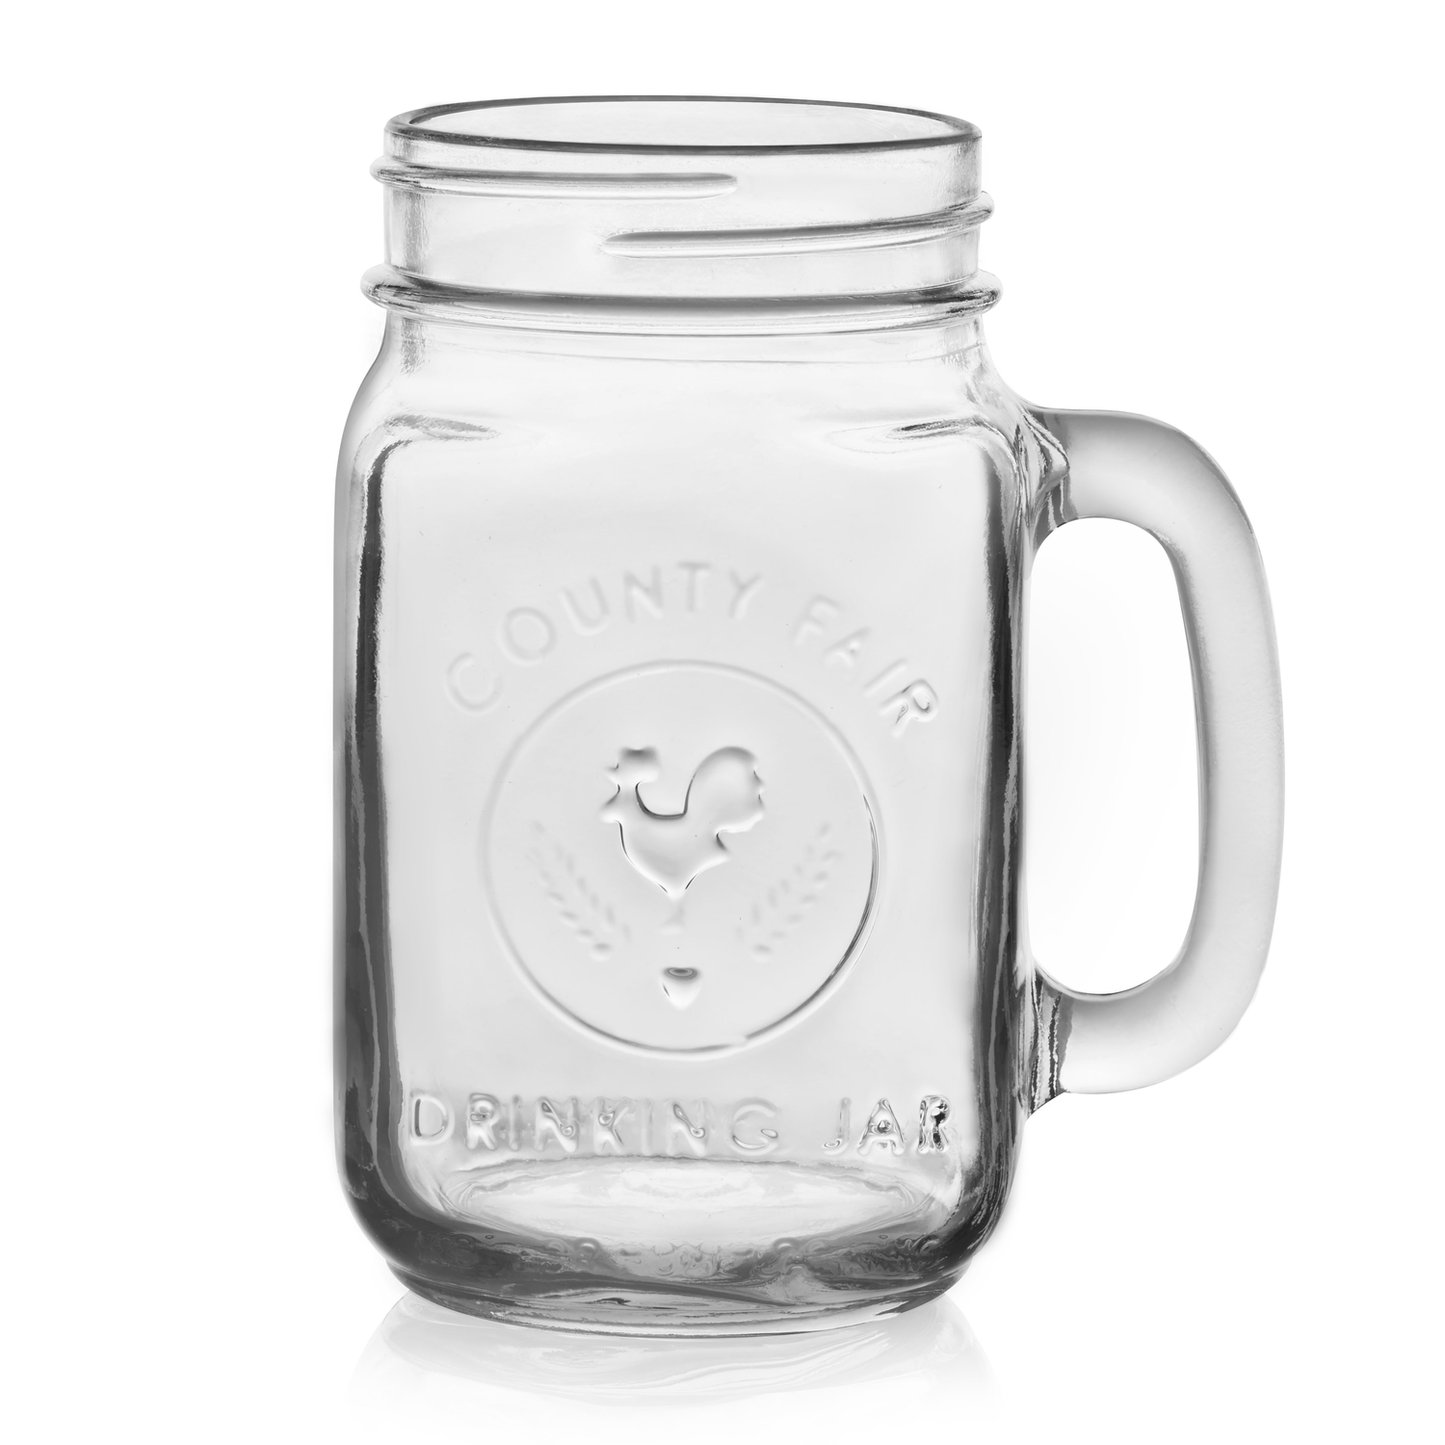 Libbey County Fair Glass Drinking Jars, Set of 12